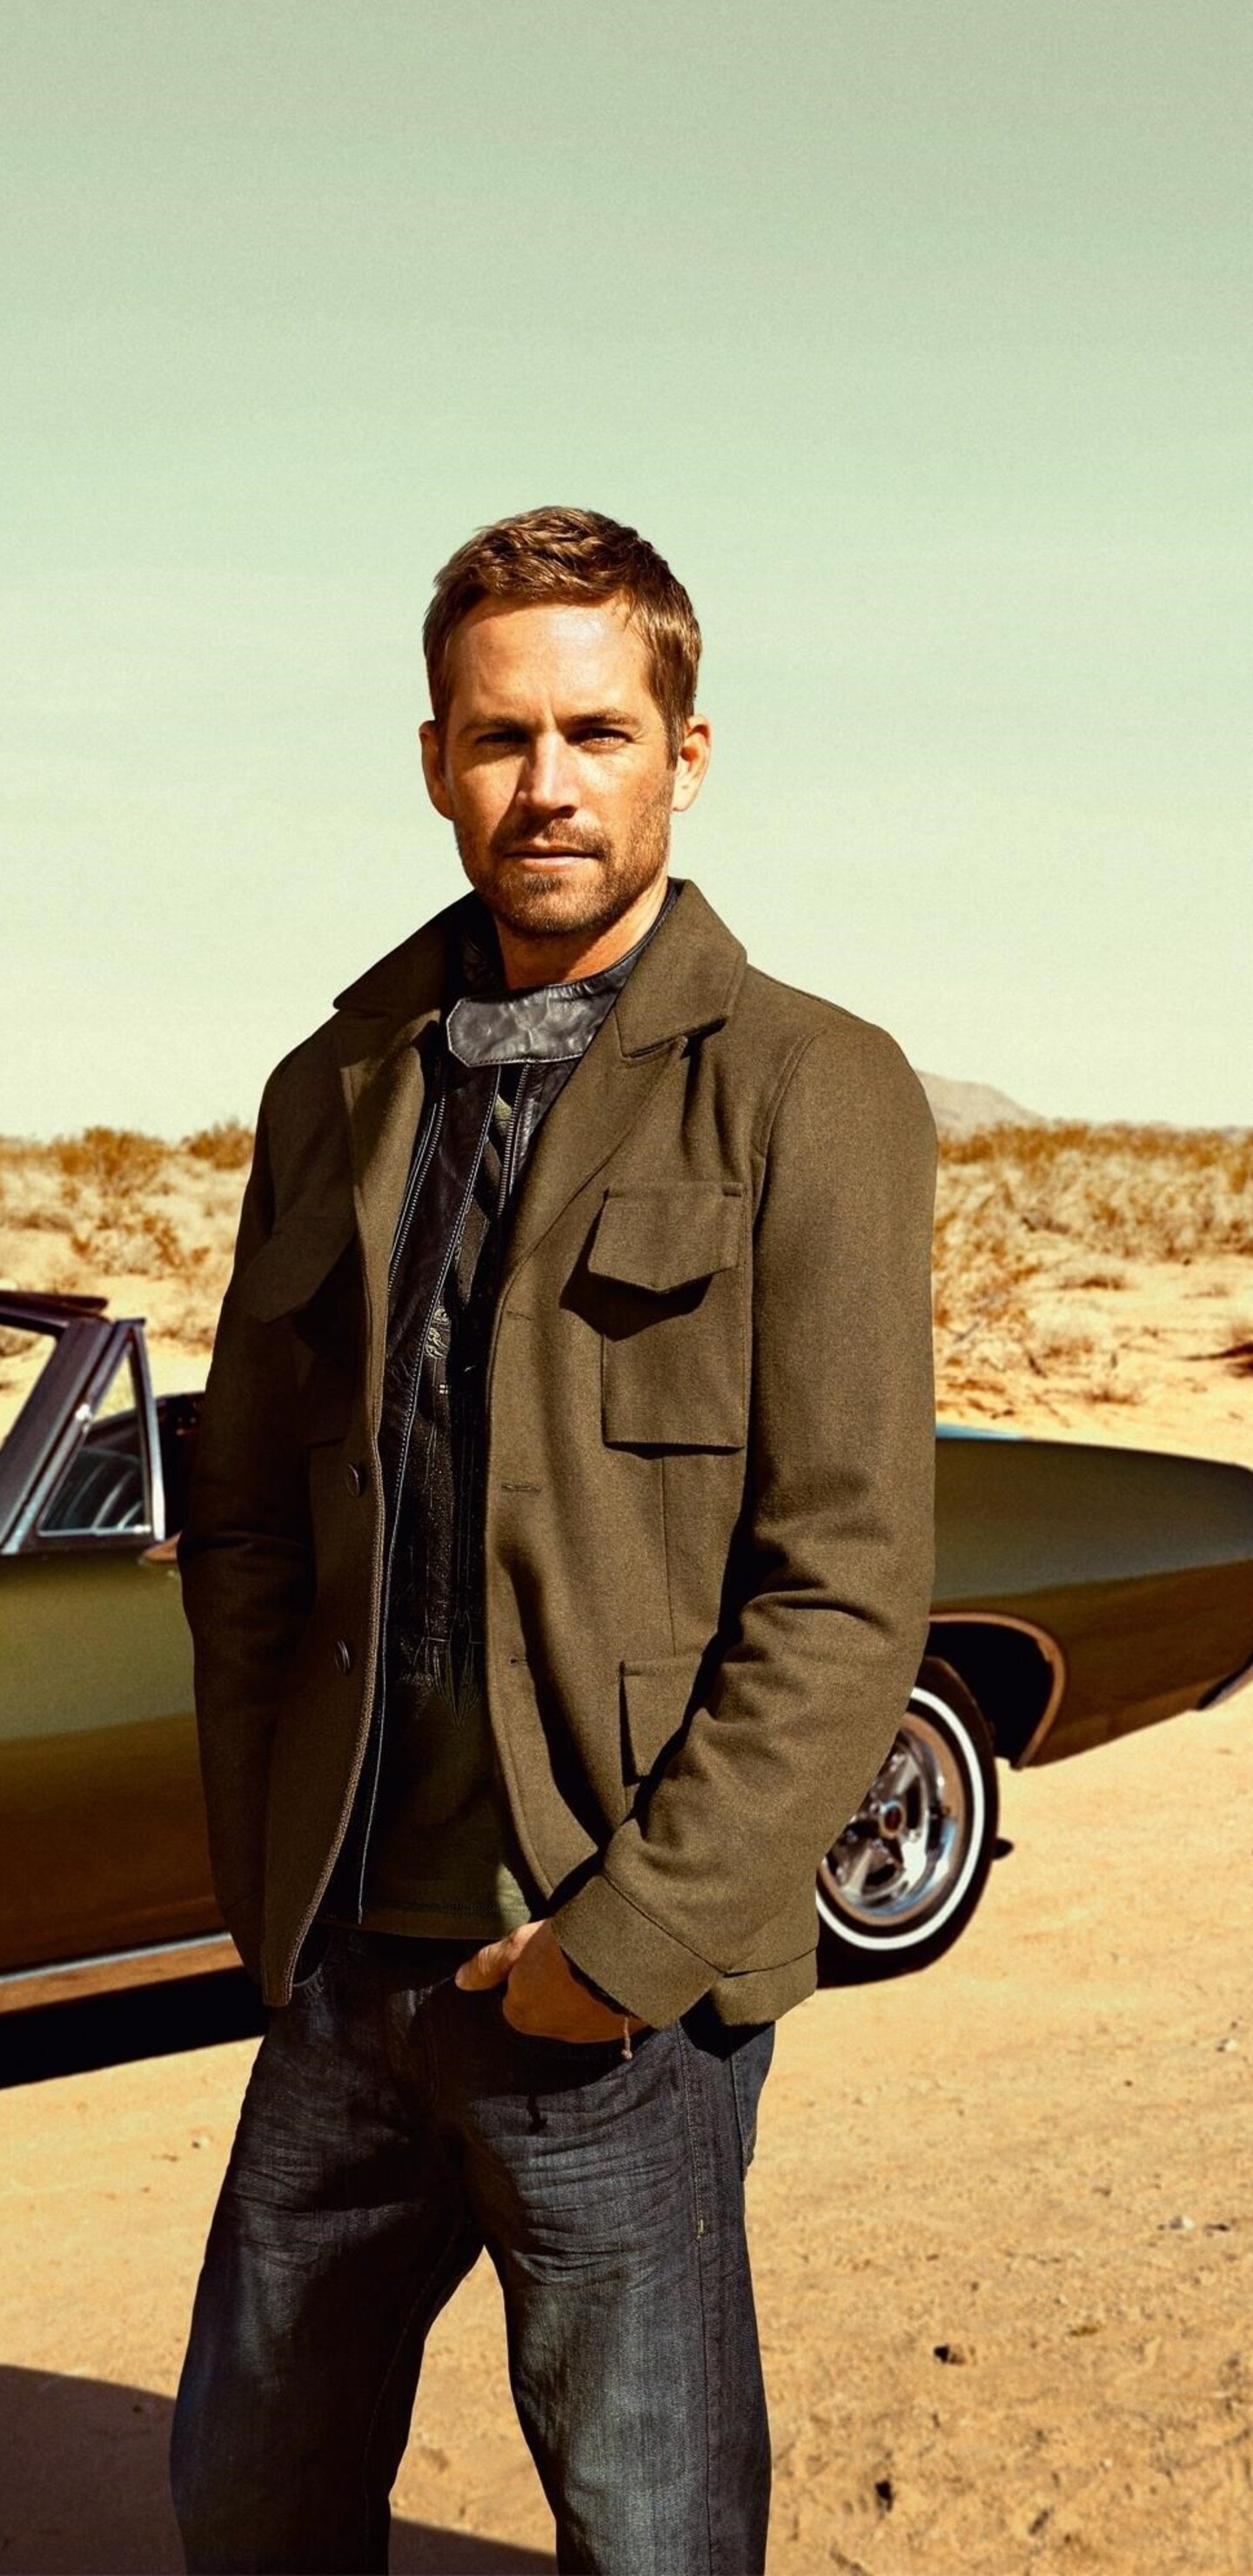 Paul Walker, Car enthusiast, Samsung Galaxy Note wallpapers, High-resolution images, 1440x2960 HD Handy